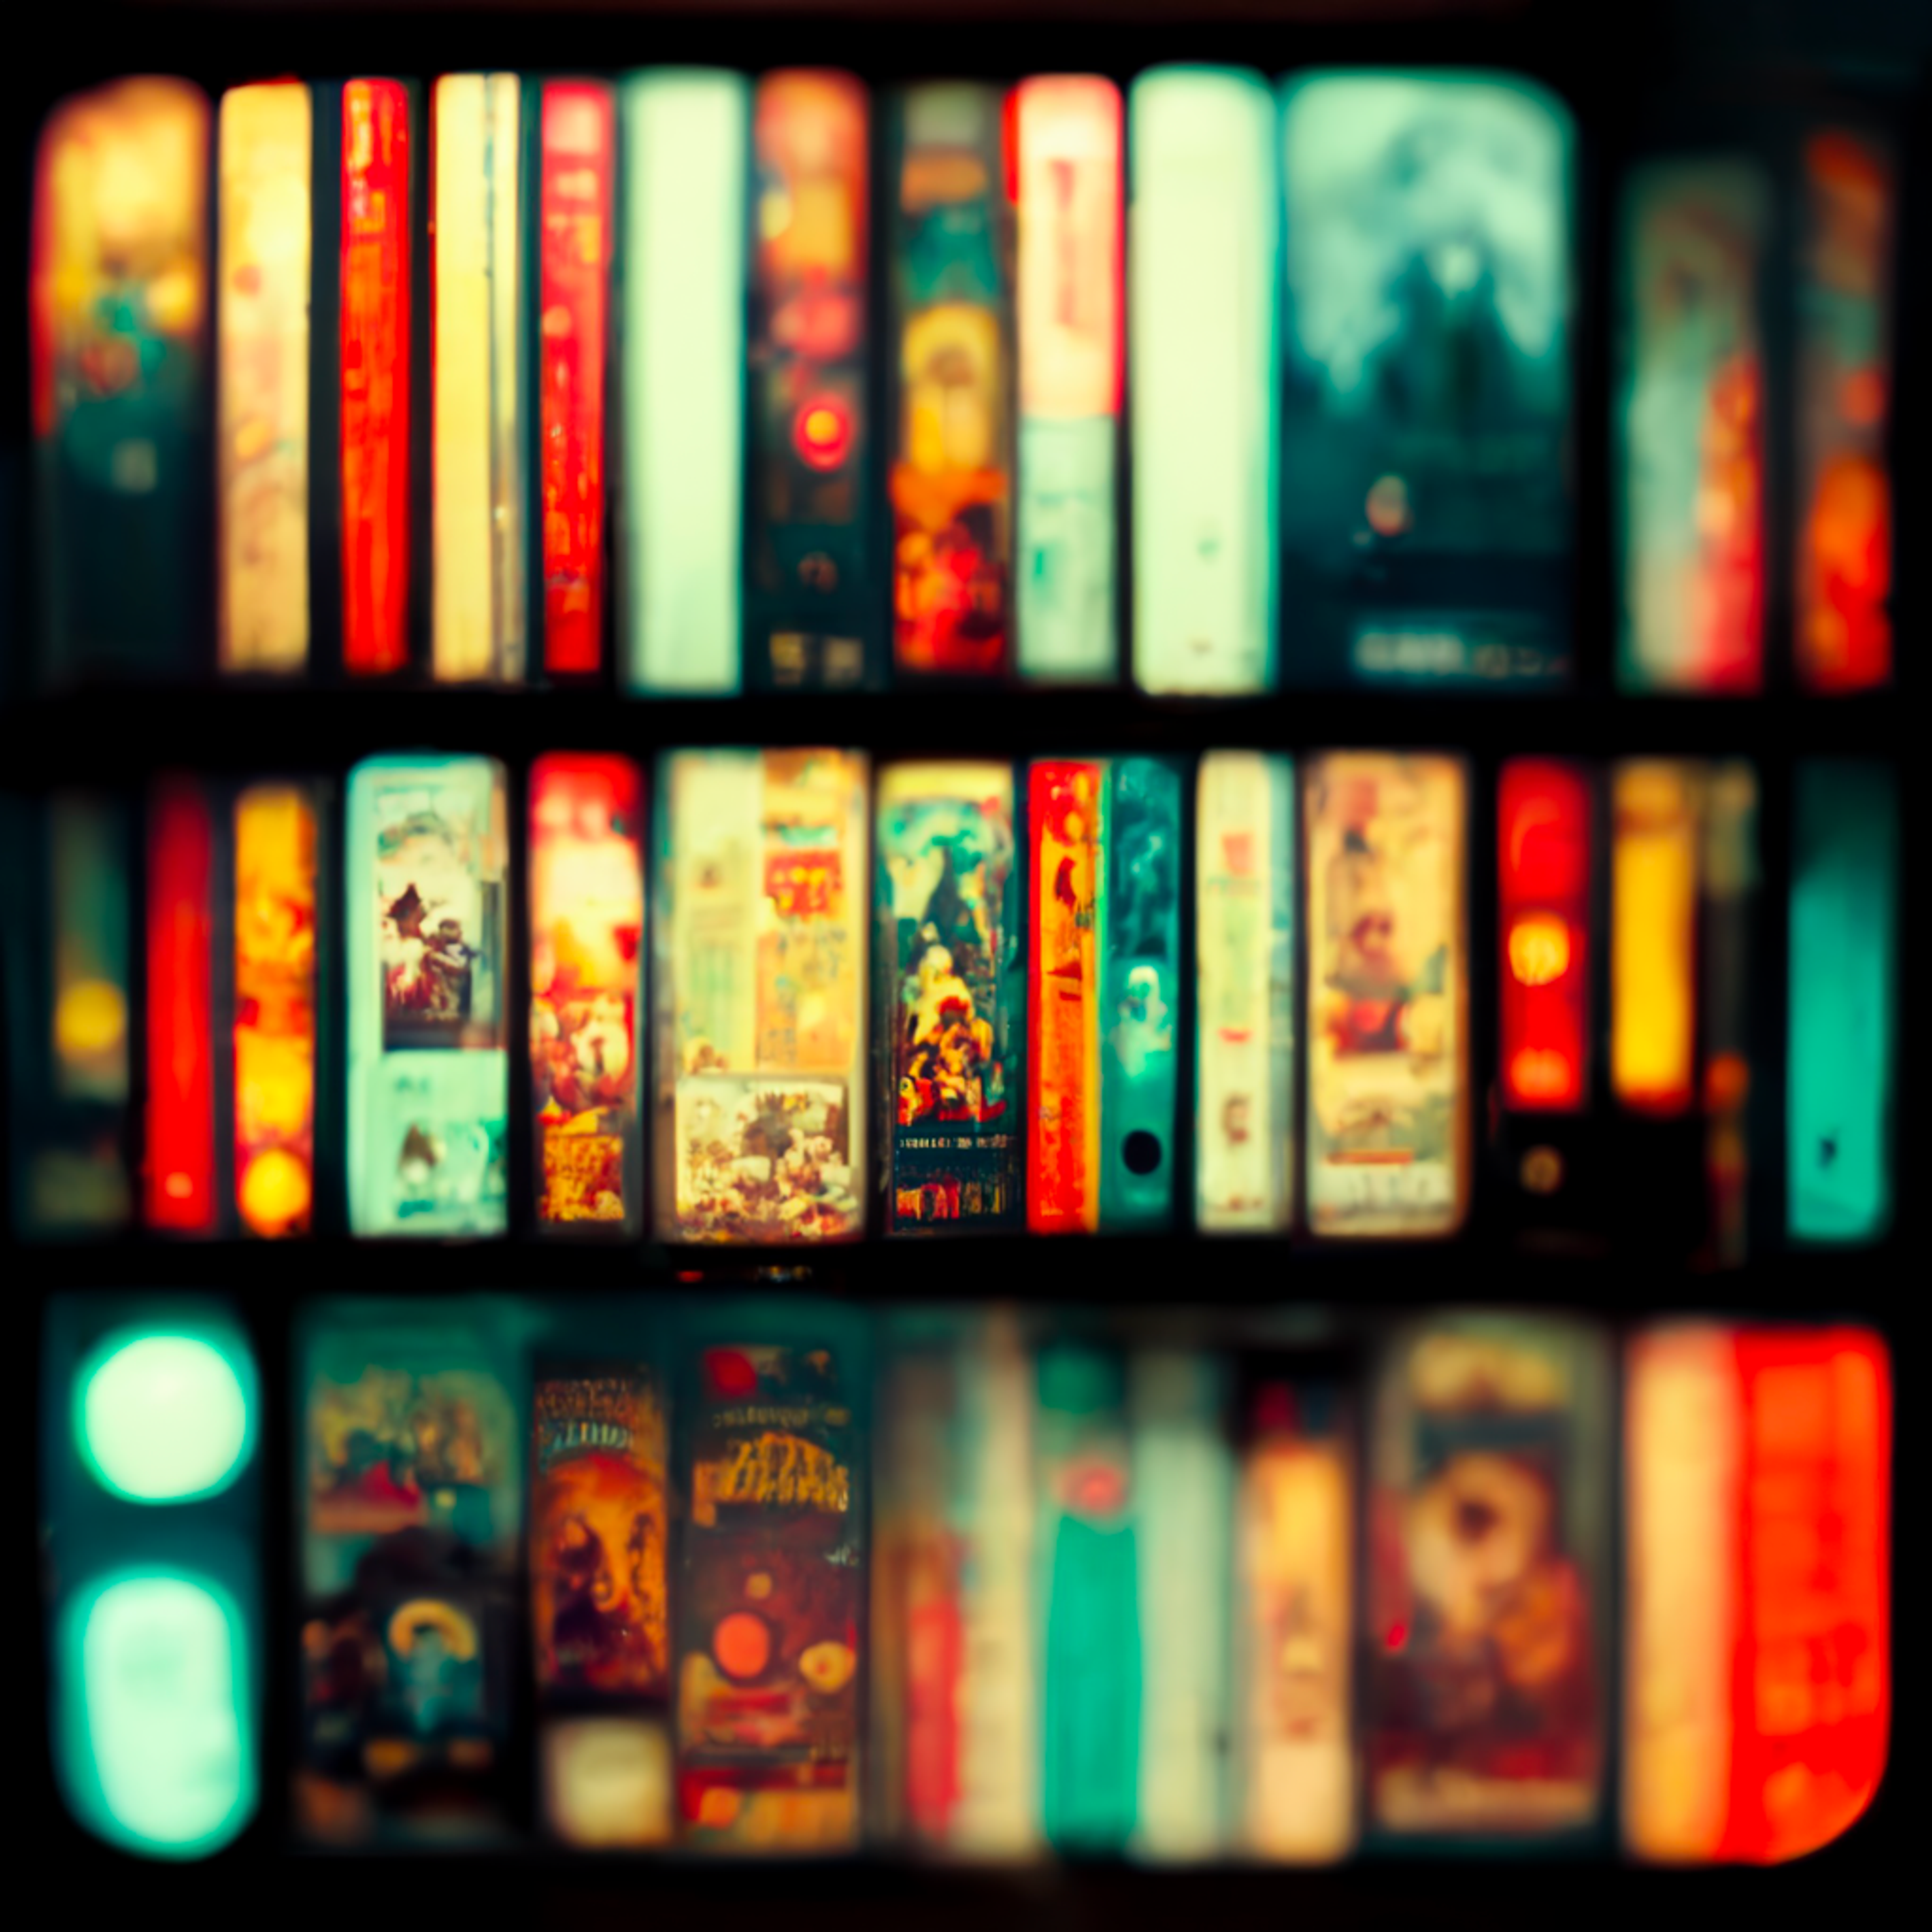 A blurry photo of shelves holding many different VHS boxes